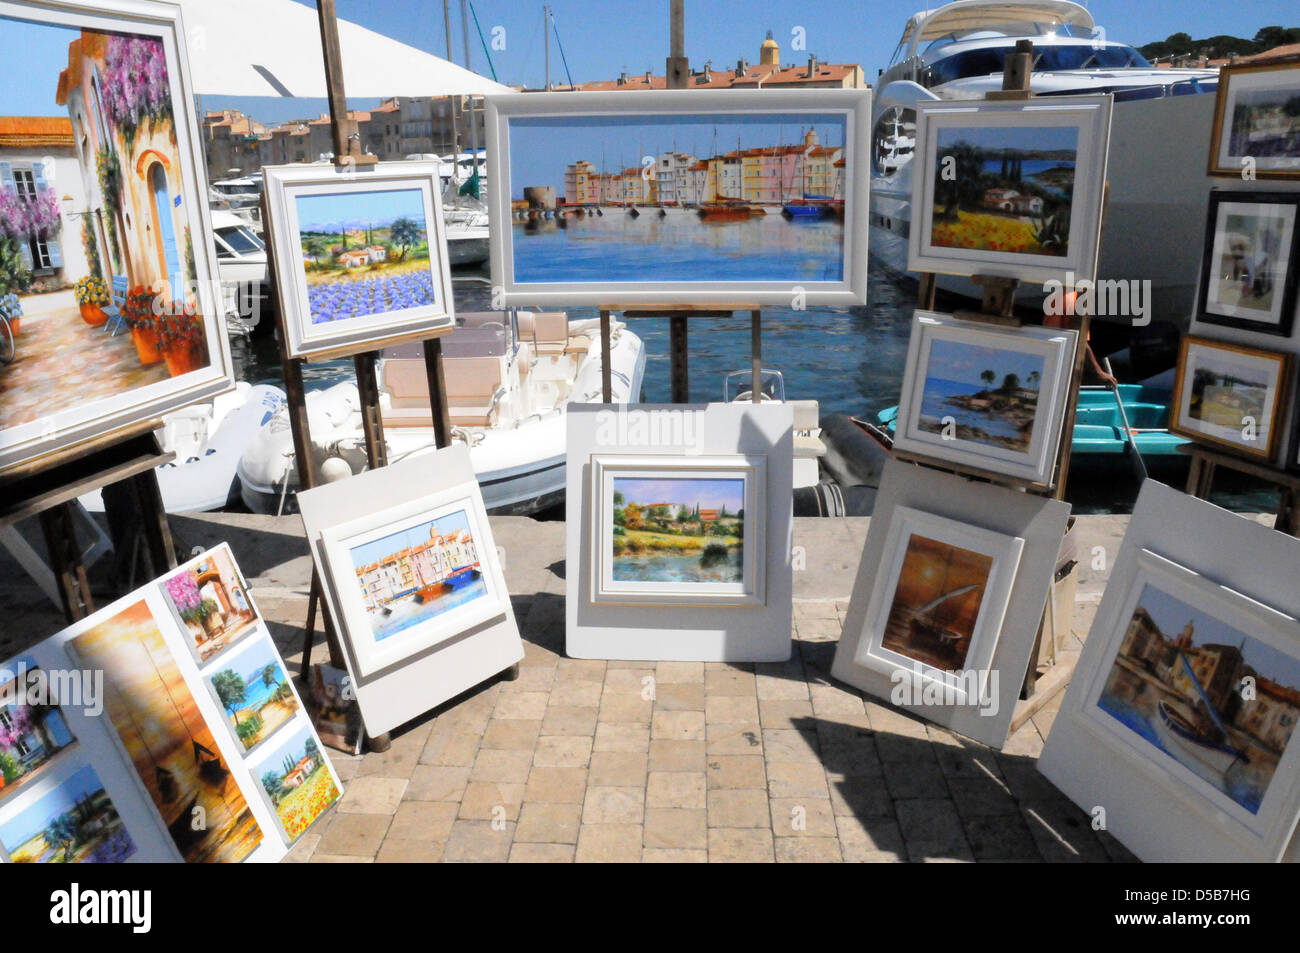 Impression of Saint-Tropez, France, 08 August 2010. The rich and famous are set to show off at southern France's jet set hotspot again. Photo: Stephan Witte Stock Photo